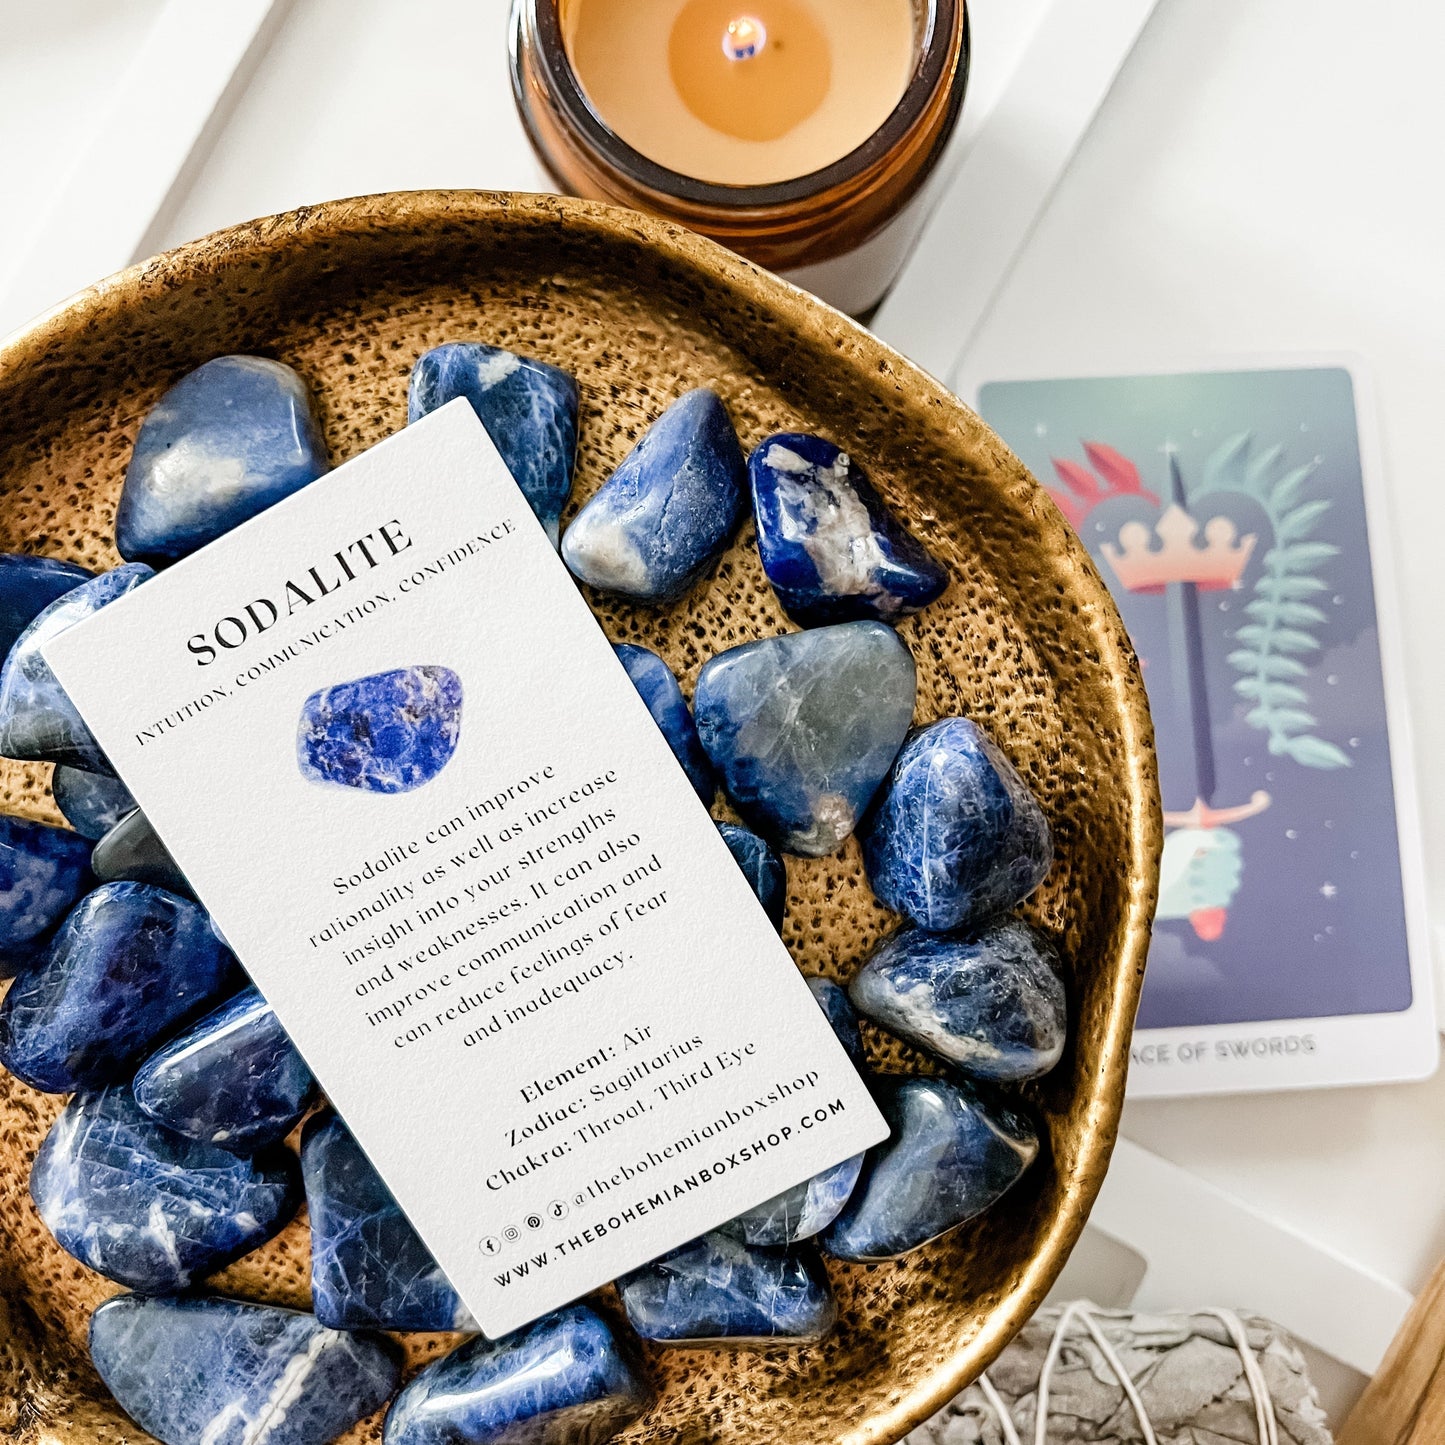 Sodalite crystals with information card